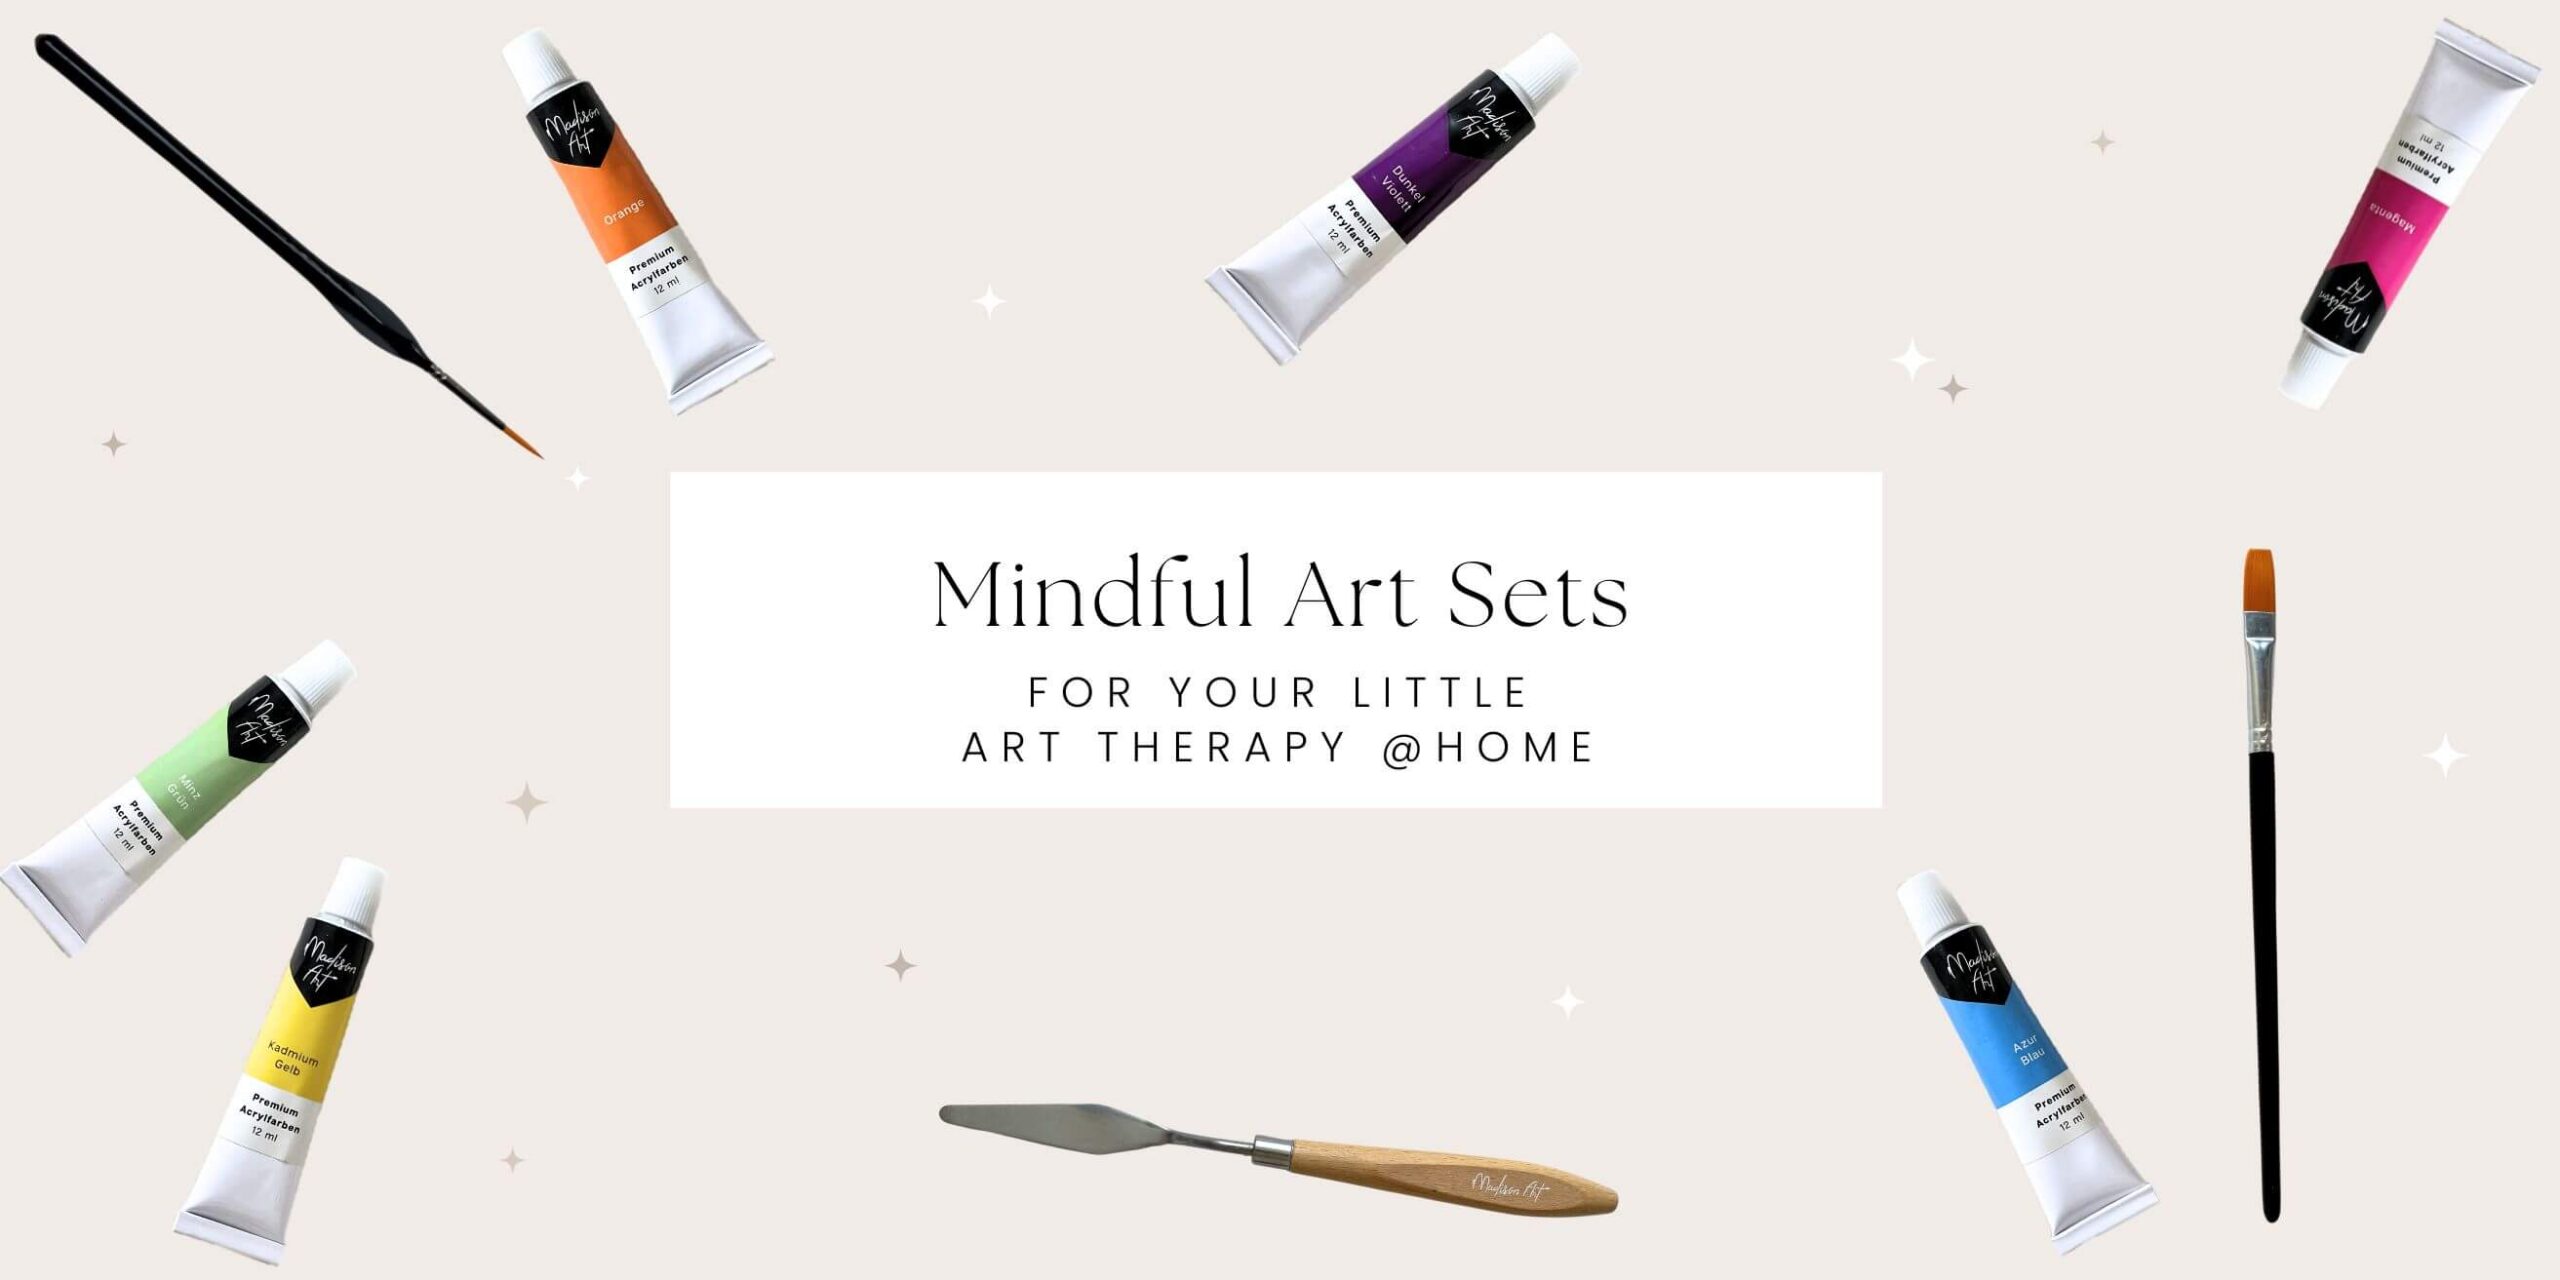 Achtsam Malen - Mindful Art Sets for your little Art Therapy at Home